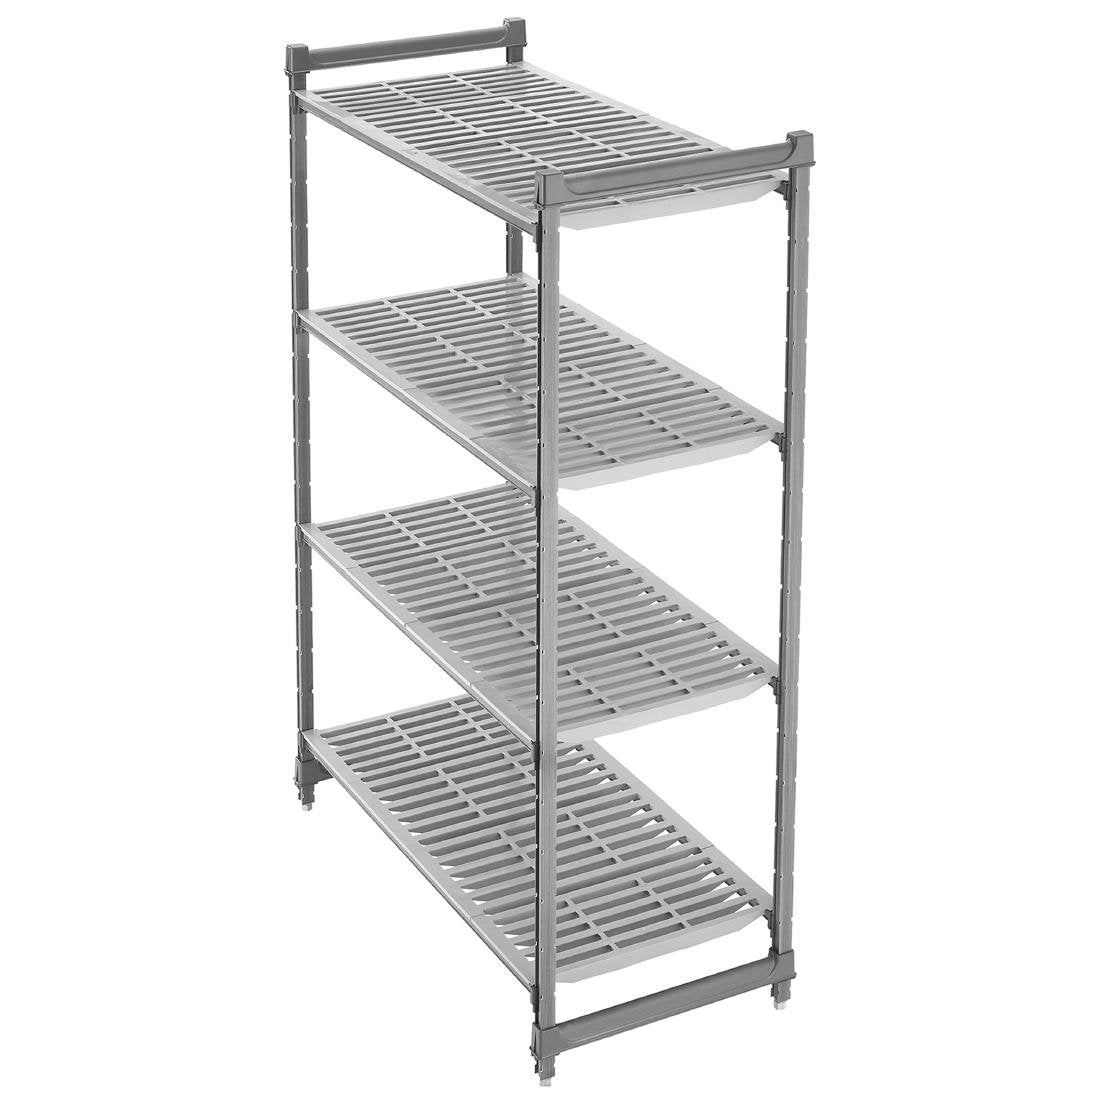 GH618 Cambro Stationary Vented 4 Shelving Units 1830 x 1220 x 460mm JD Catering Equipment Solutions Ltd